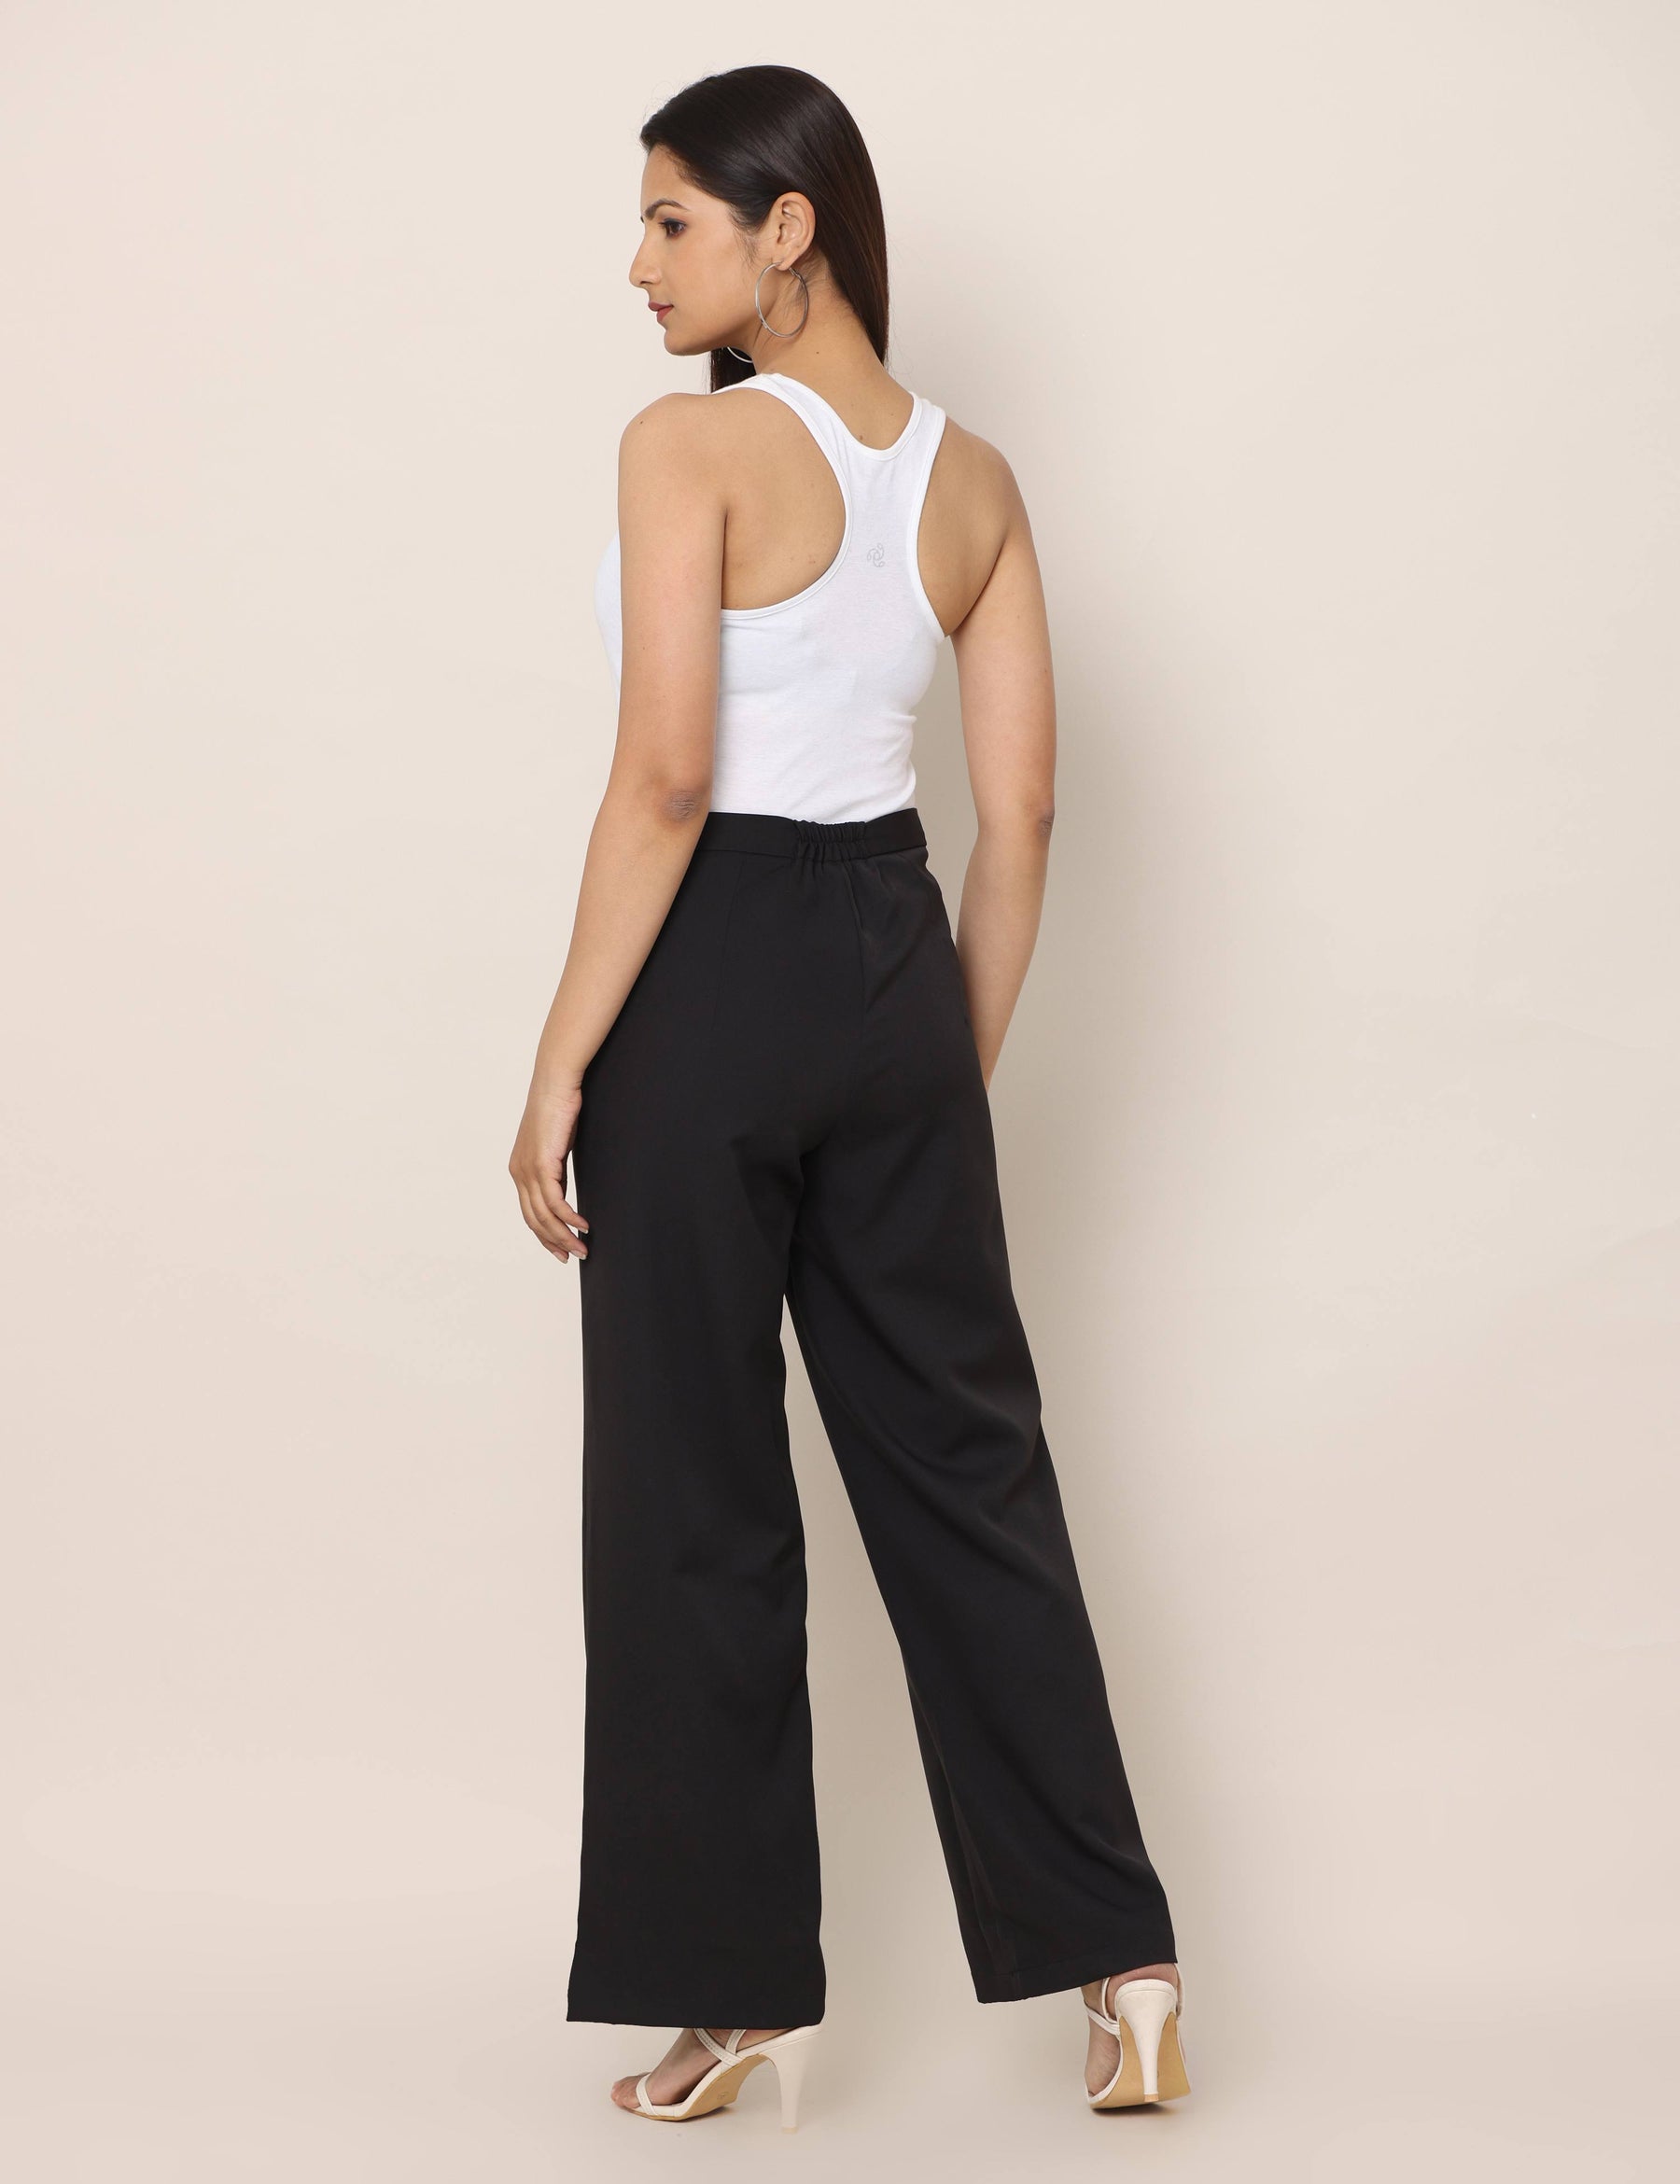 Black Stretch Woven 90S Belted Flared Trousers  PrettyLittleThing